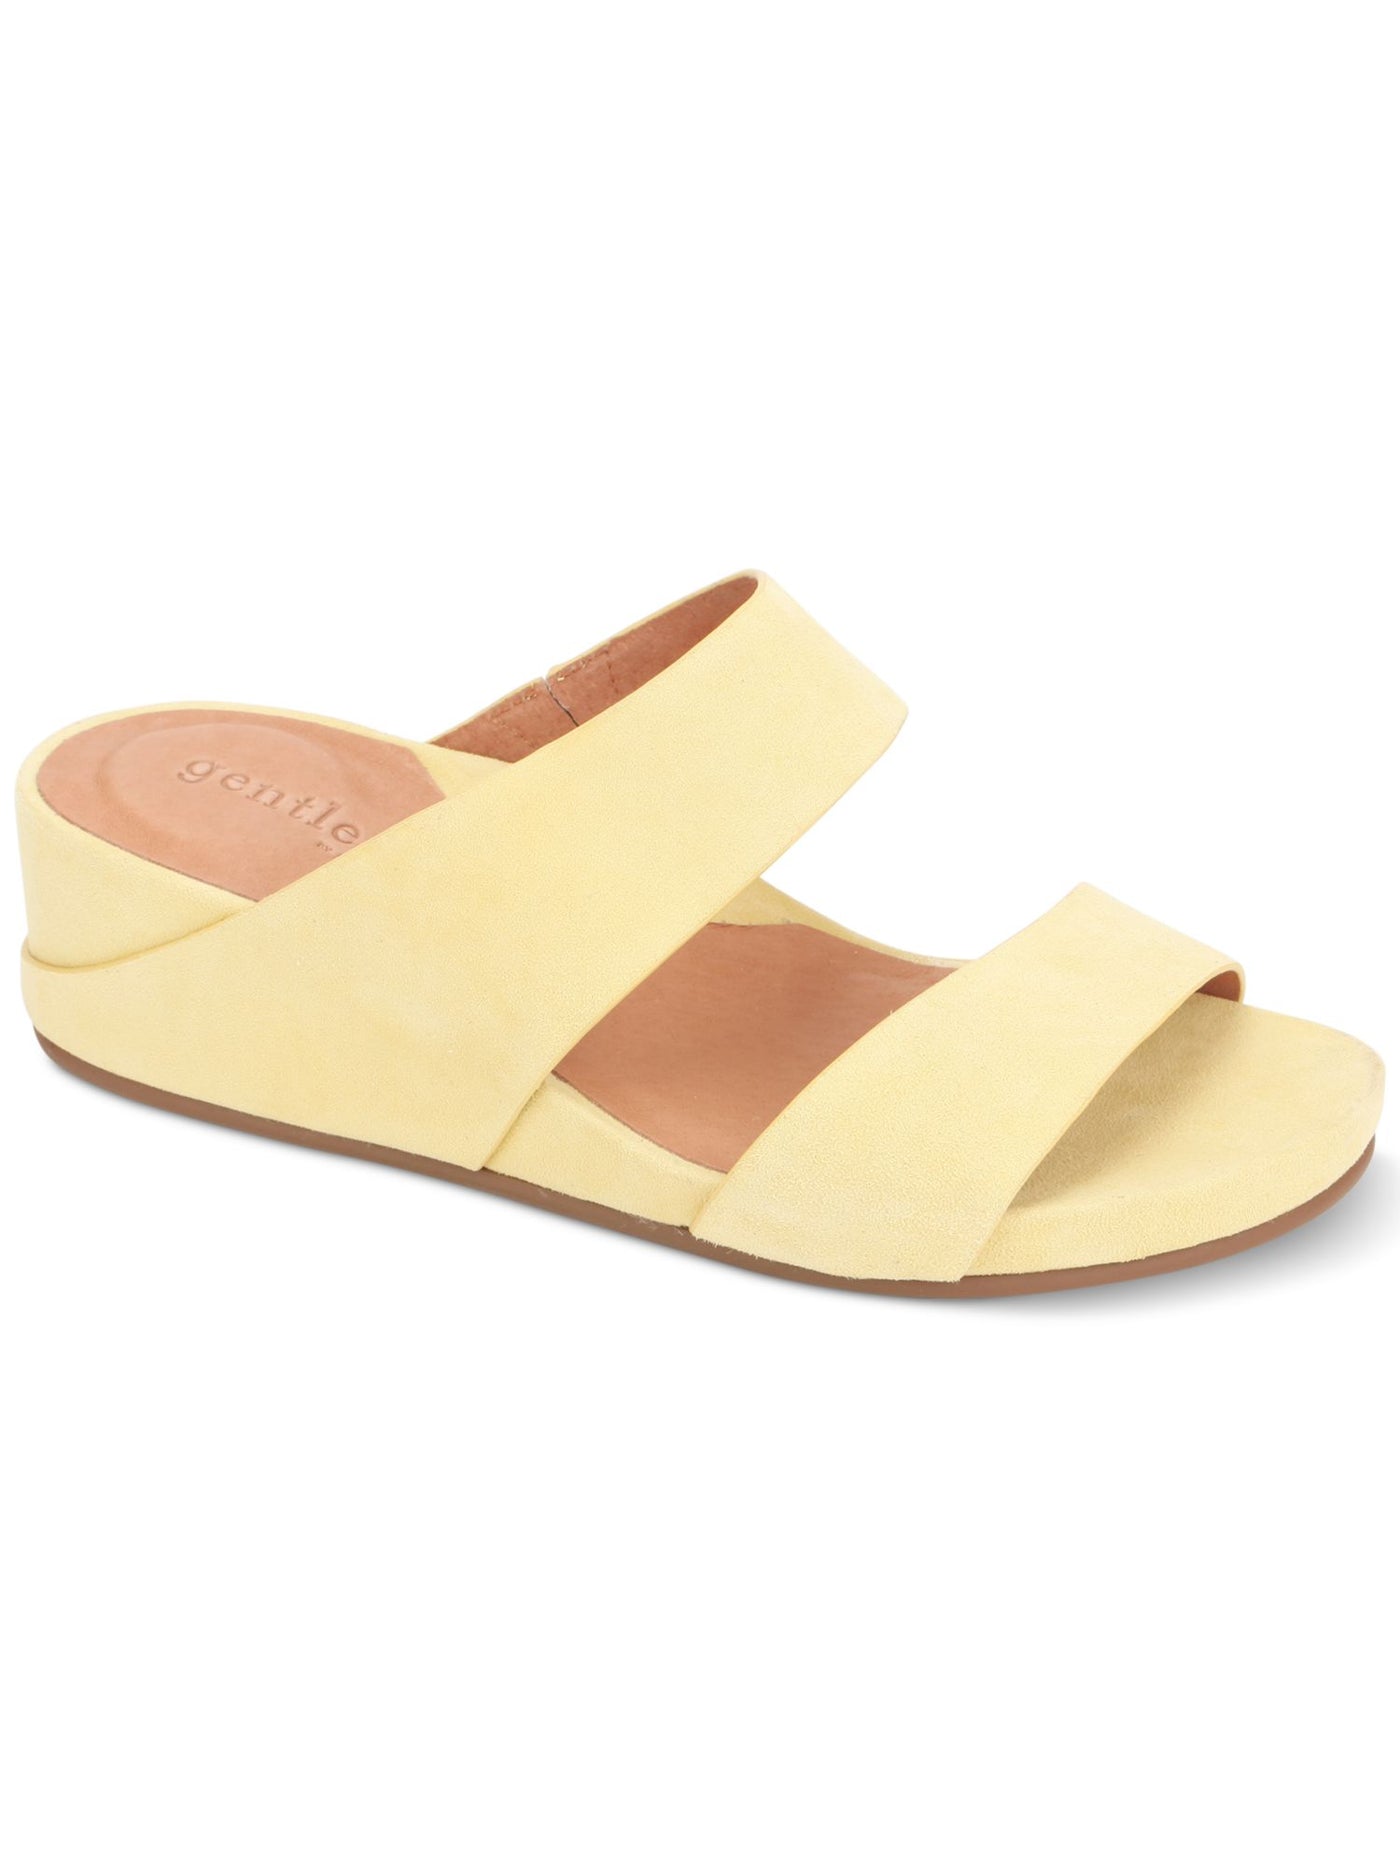 GENTLE SOULS KENNETH COLE Womens Yellow Breathable Comfort Gisele Round Toe Wedge Slip On Leather Slide Sandals Shoes 5.5 M